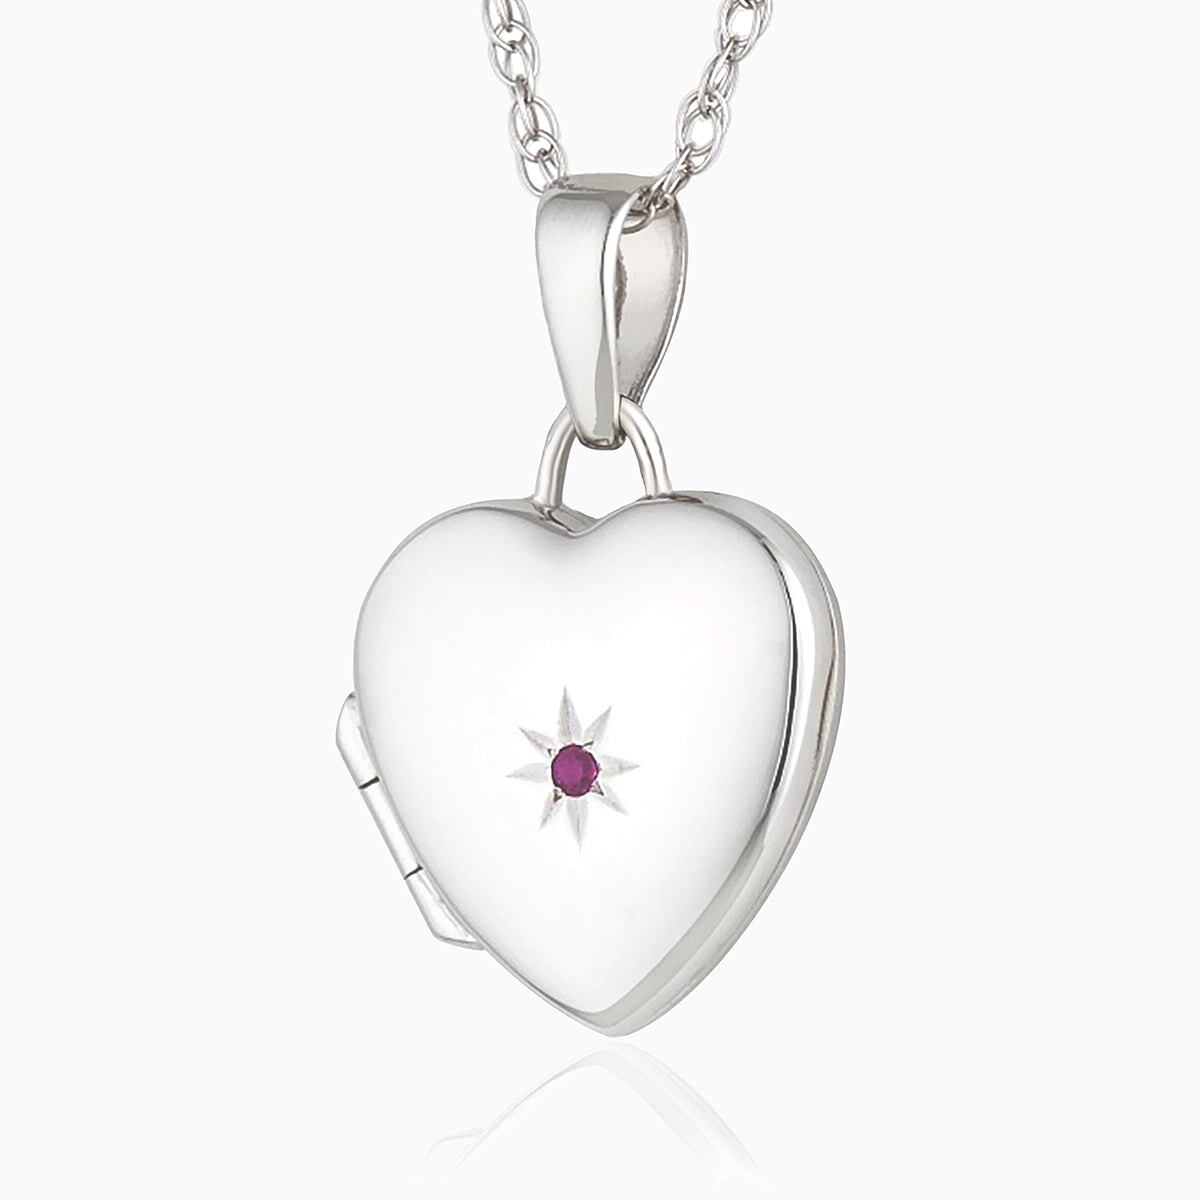 Product title: Petite White Gold and Pink Sapphire Locket, product type: Locket